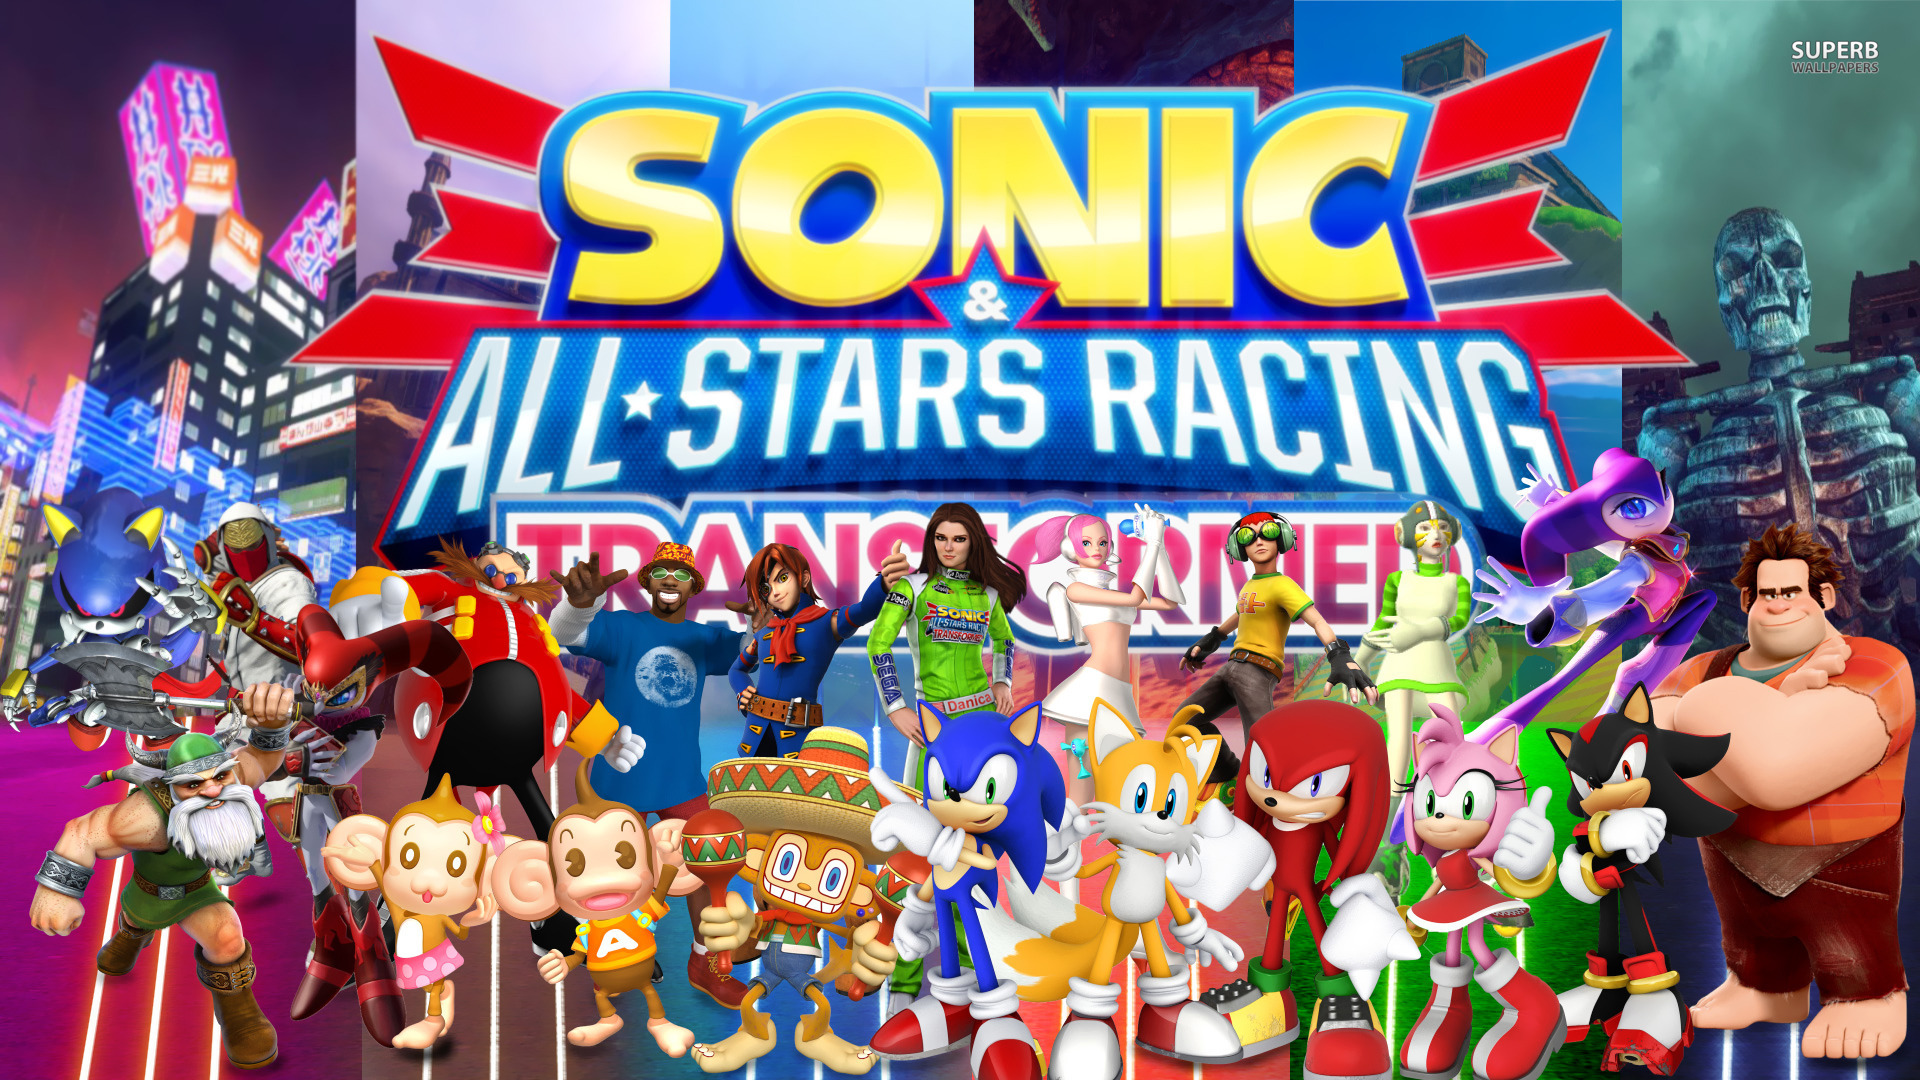 Sonic All Stars Racing Transformed Now Xbox One Backwards Compatible Segabits 1 Source For Sega News